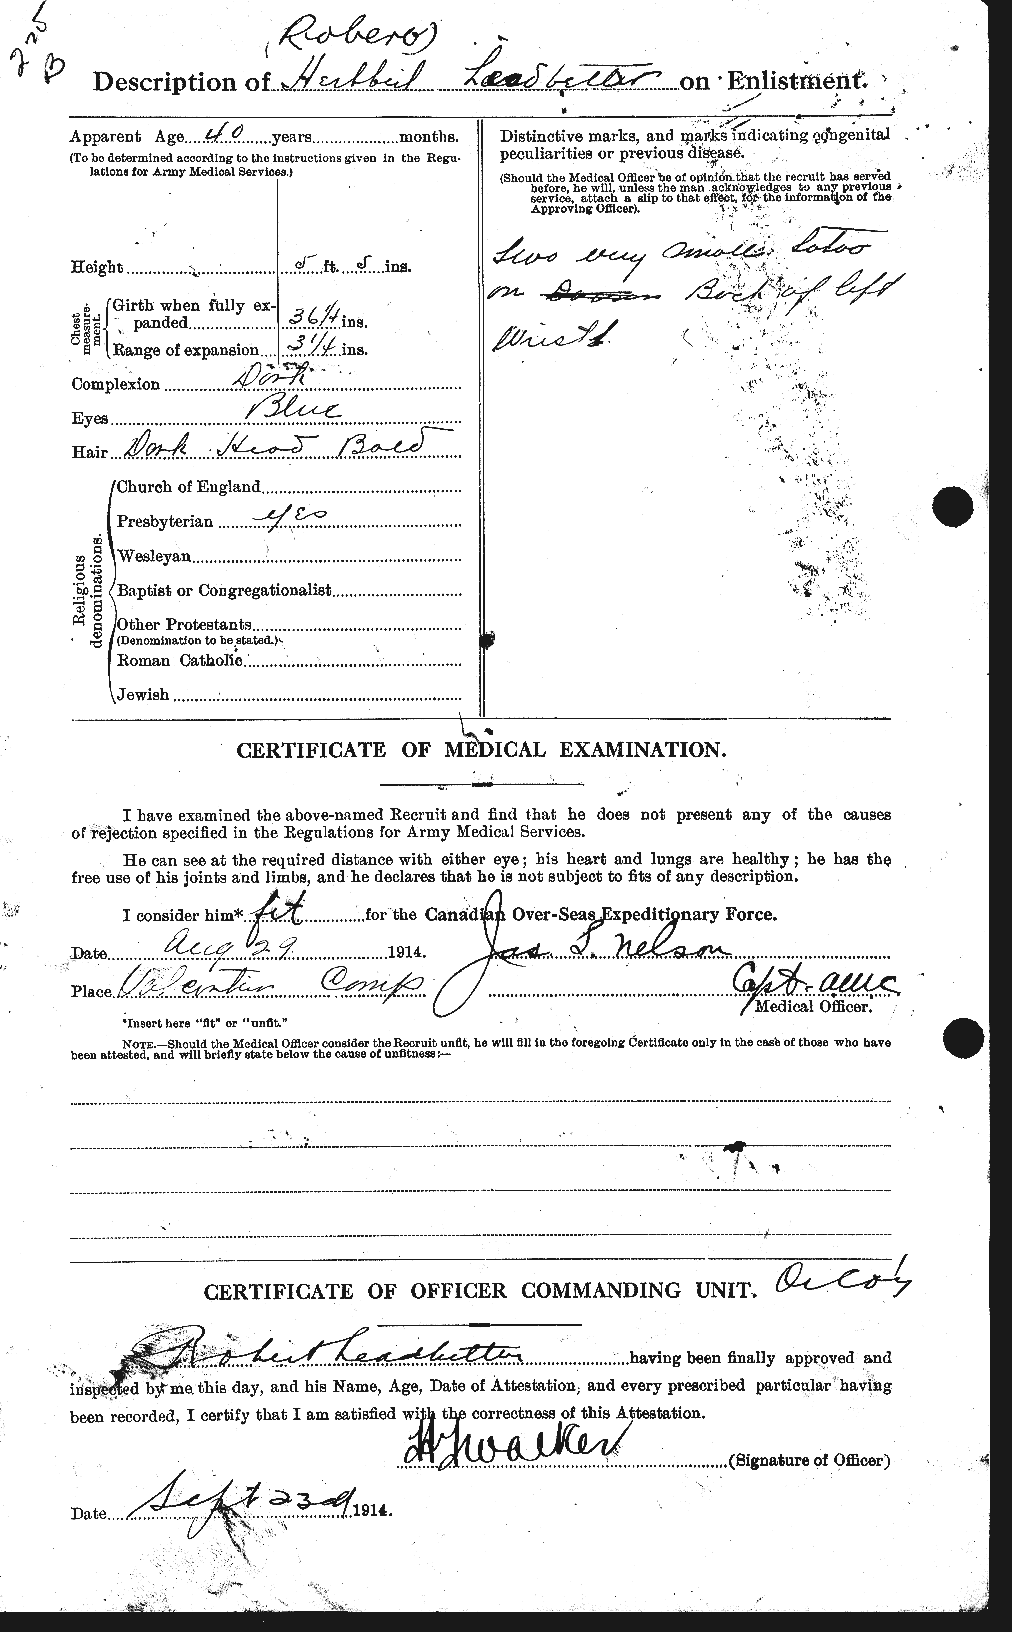 Personnel Records of the First World War - CEF 455847b